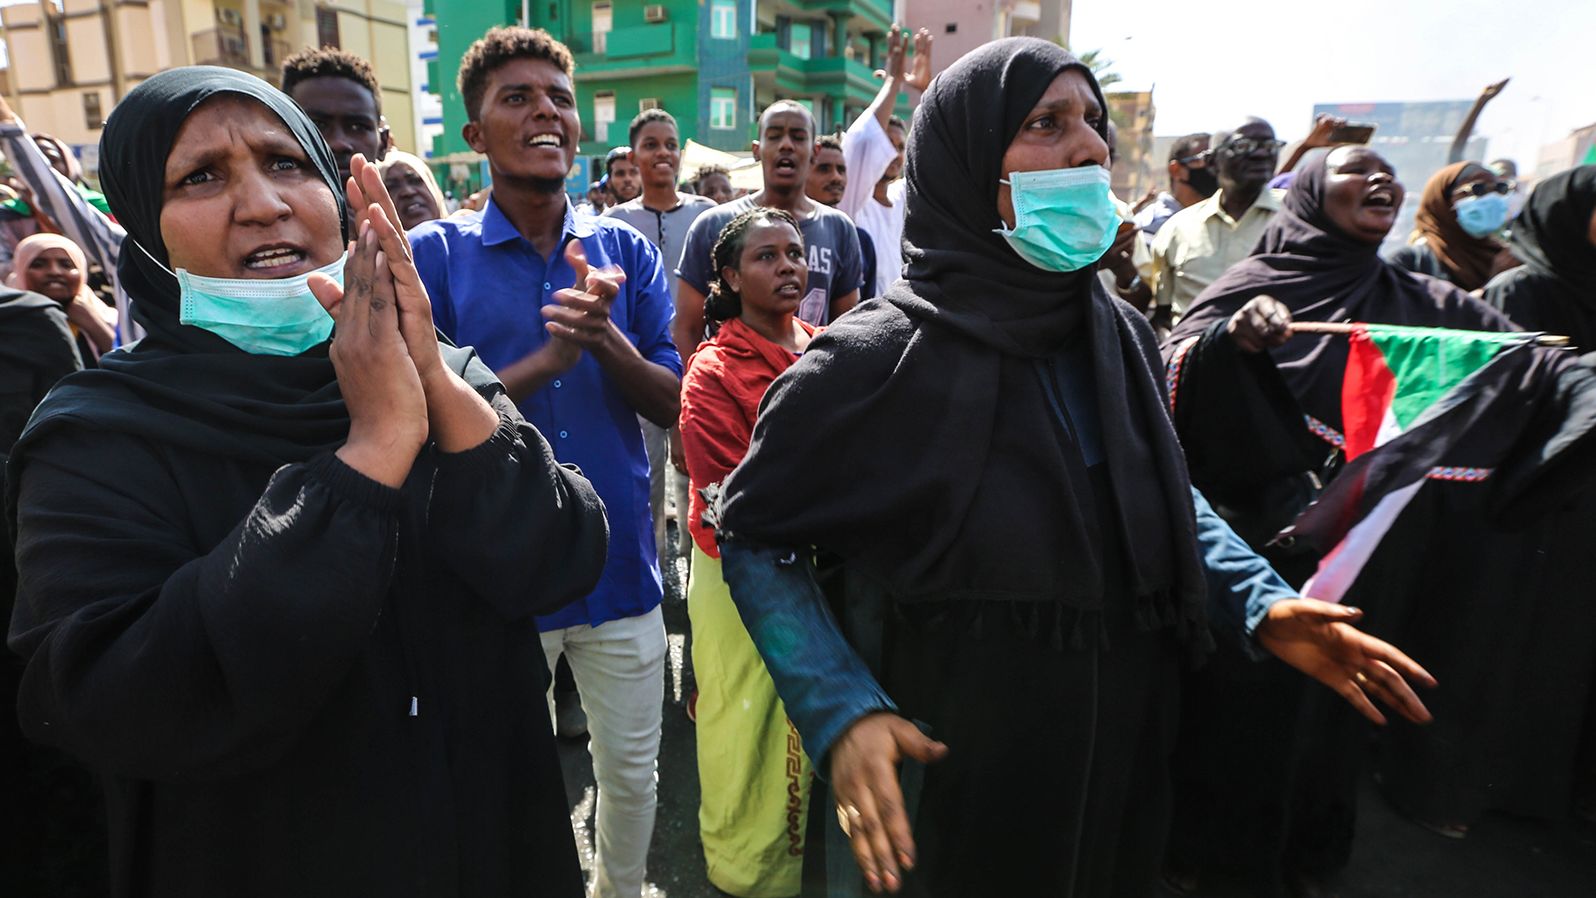 Sudanese protesters demand the end of military rule during pro-democracy demonstrations in Khartoum on Saturday, October 30.